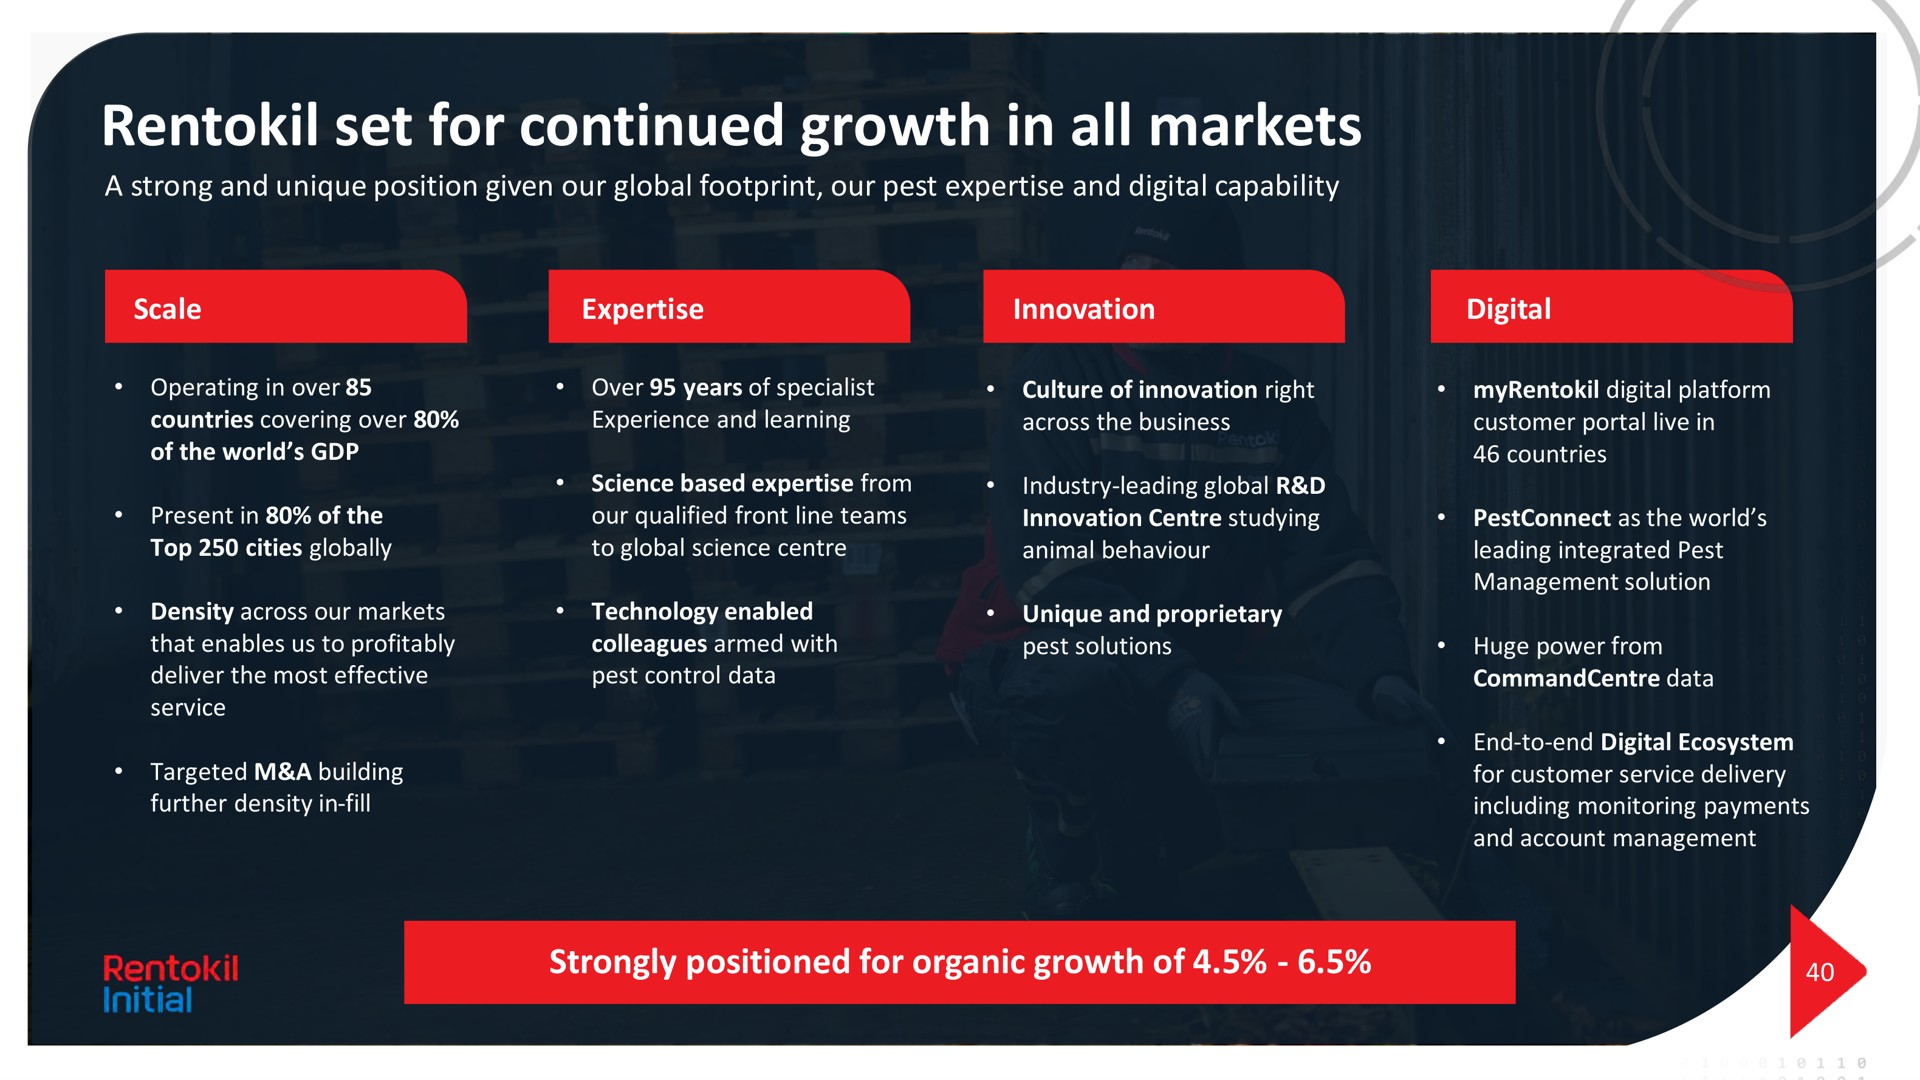 set for continued growth in all markets strongly positioned for organic growth of | Rentokil Initial